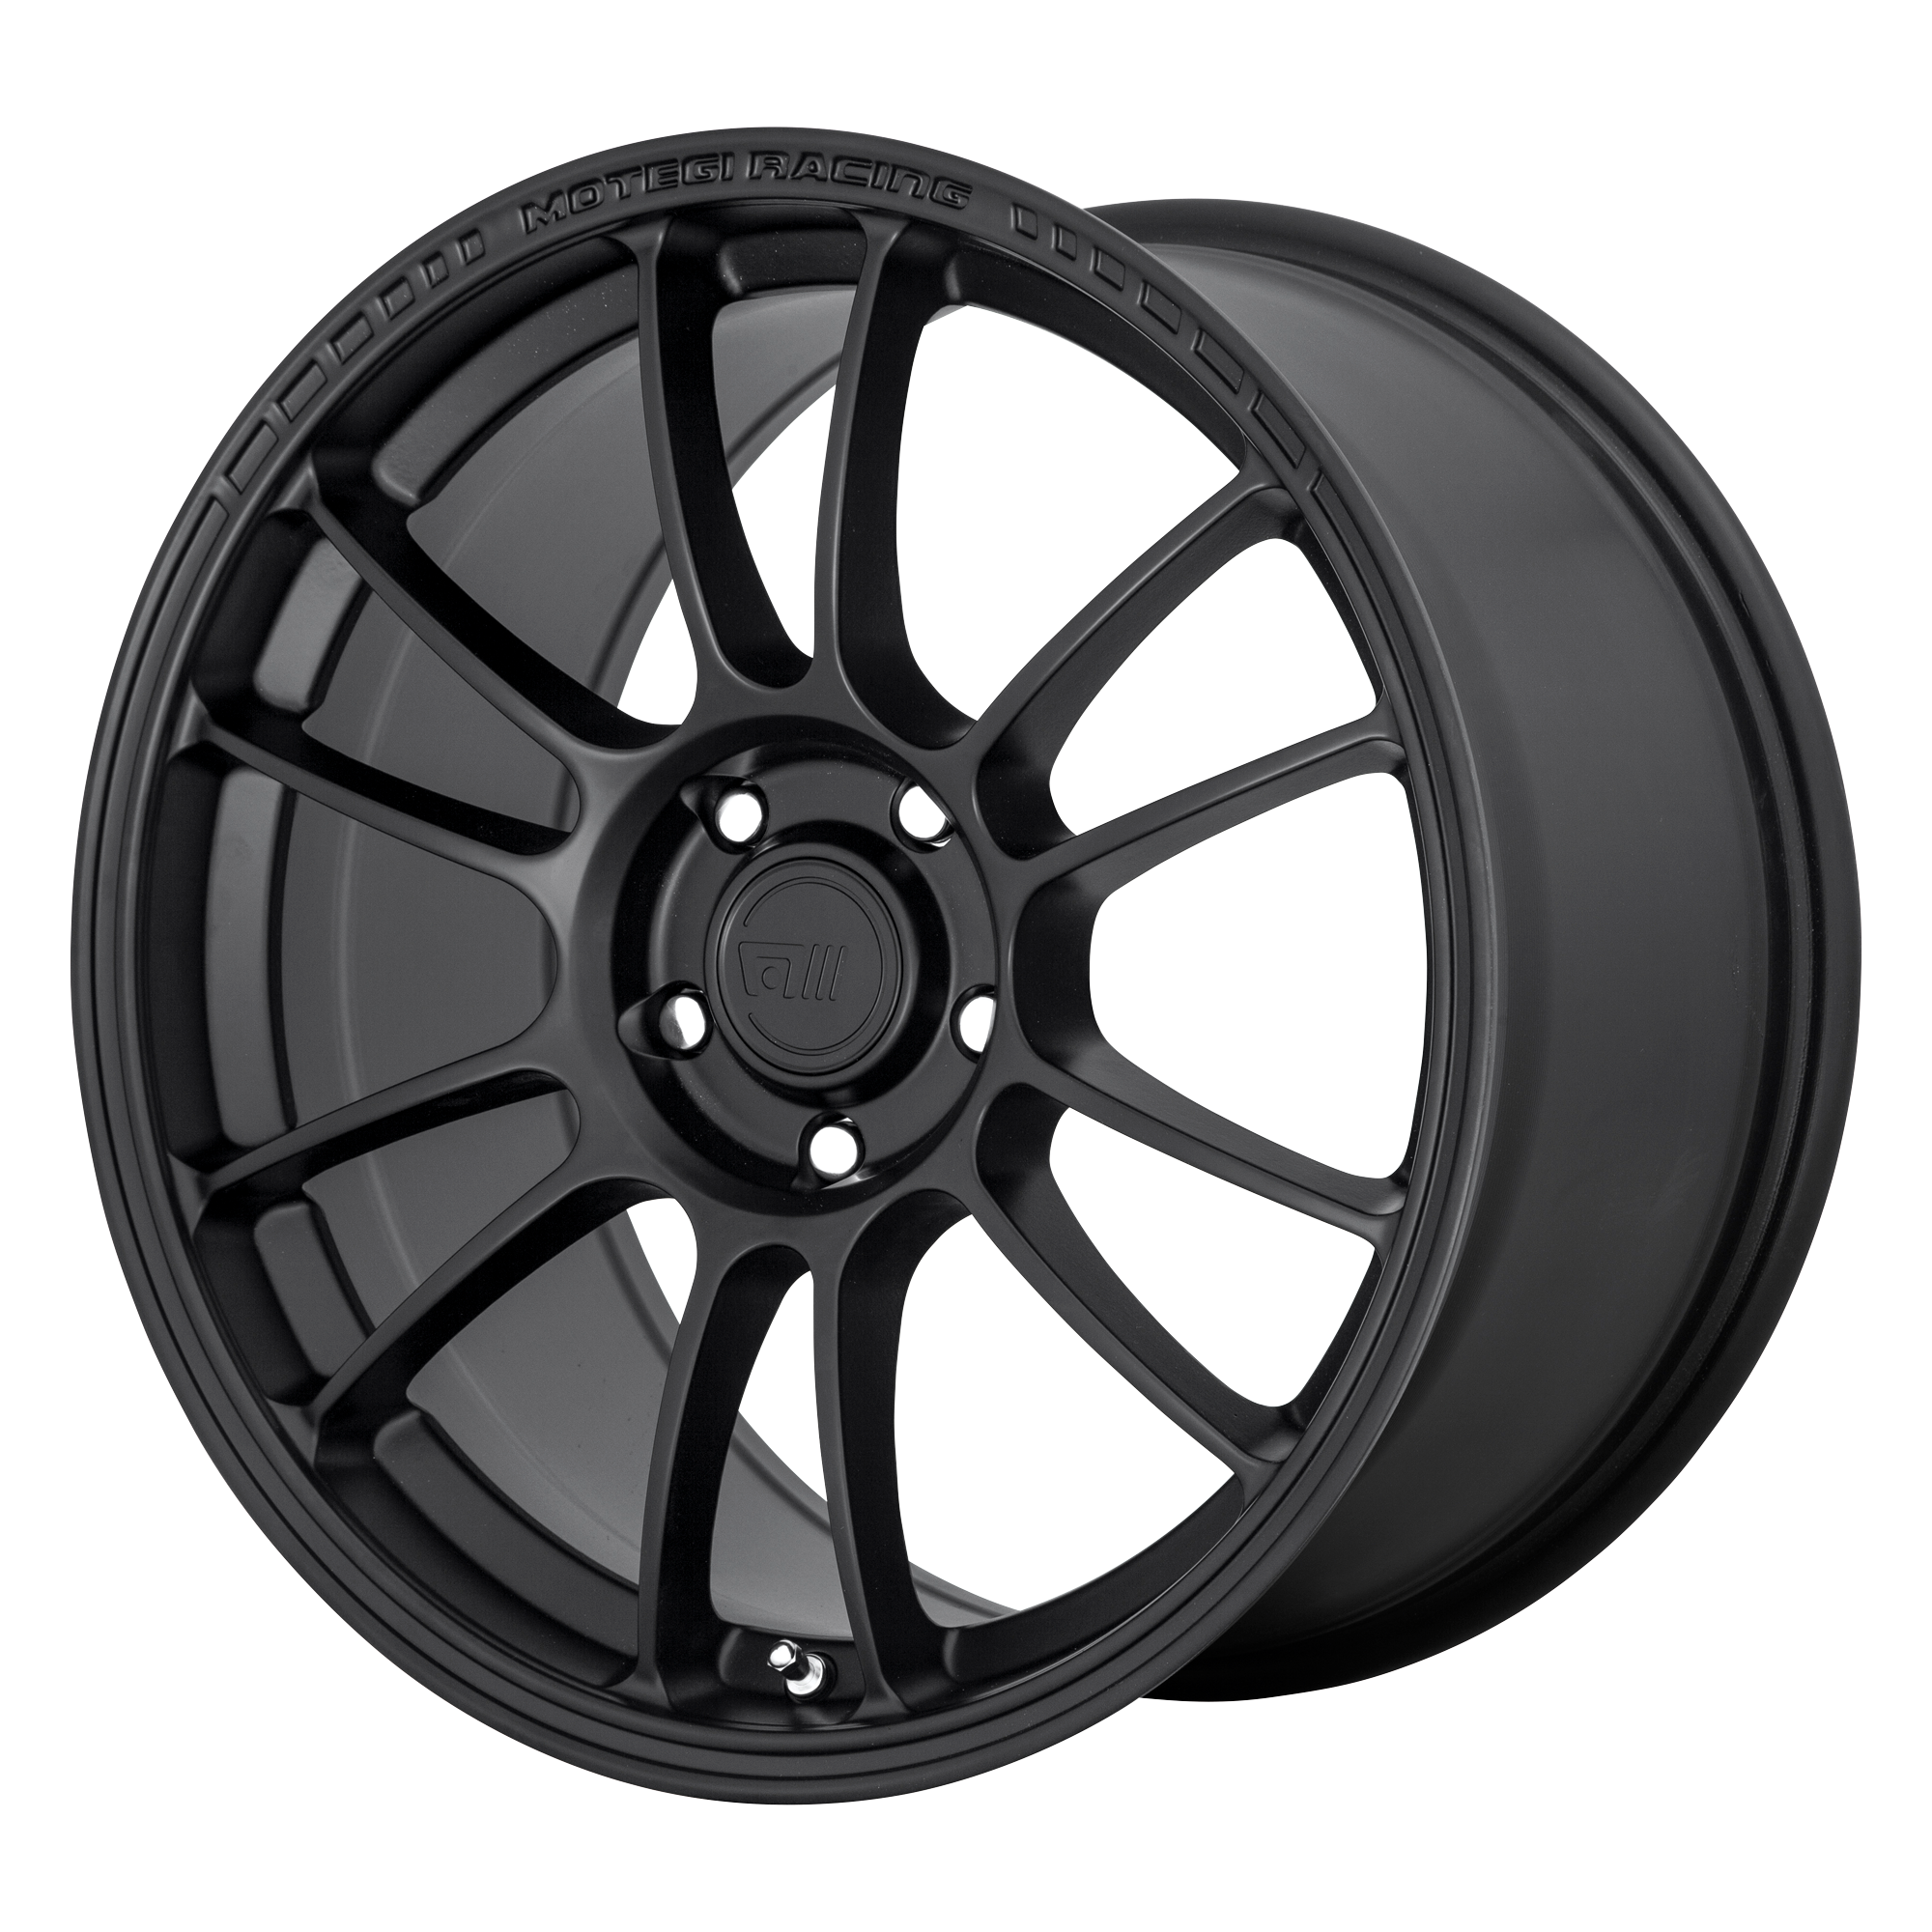 SS6 18x8.5 5x114.30 SATIN BLACK (42 mm) - Tires and Engine Performance